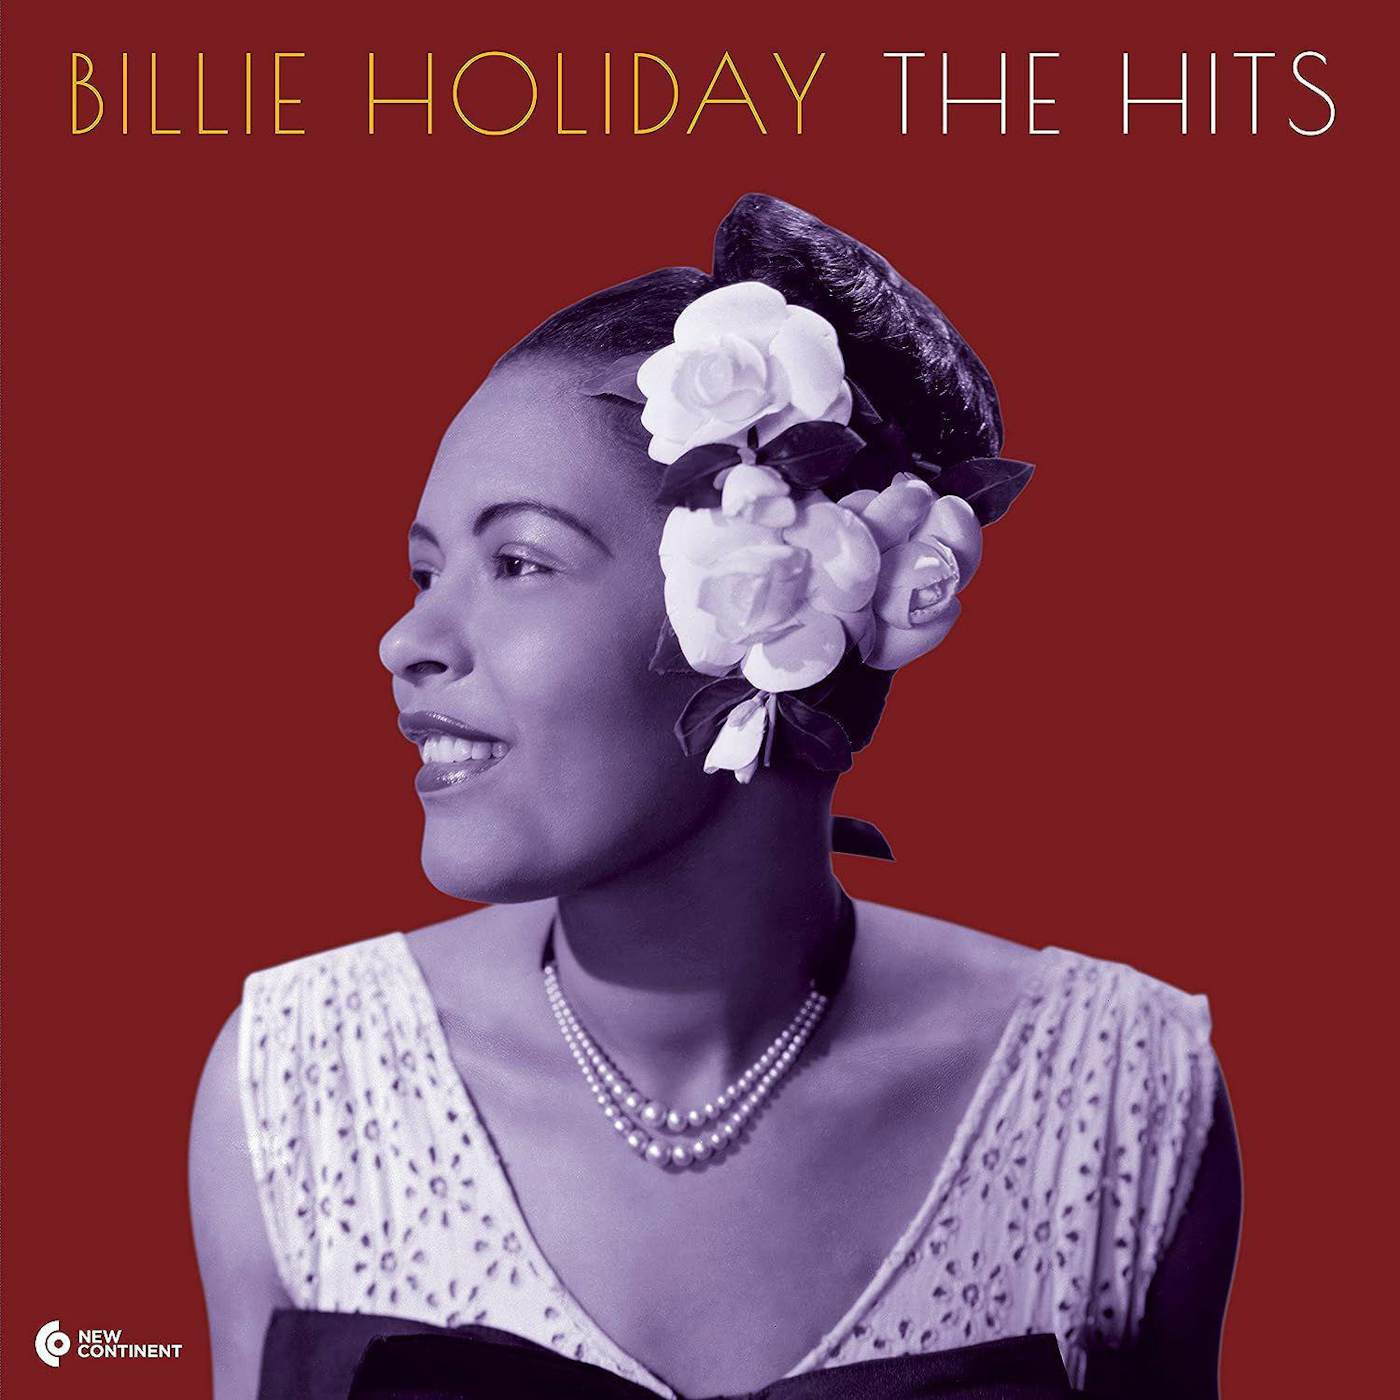 Billie Holiday LP Vinyl Record - The Hits (Deluxe Edition)